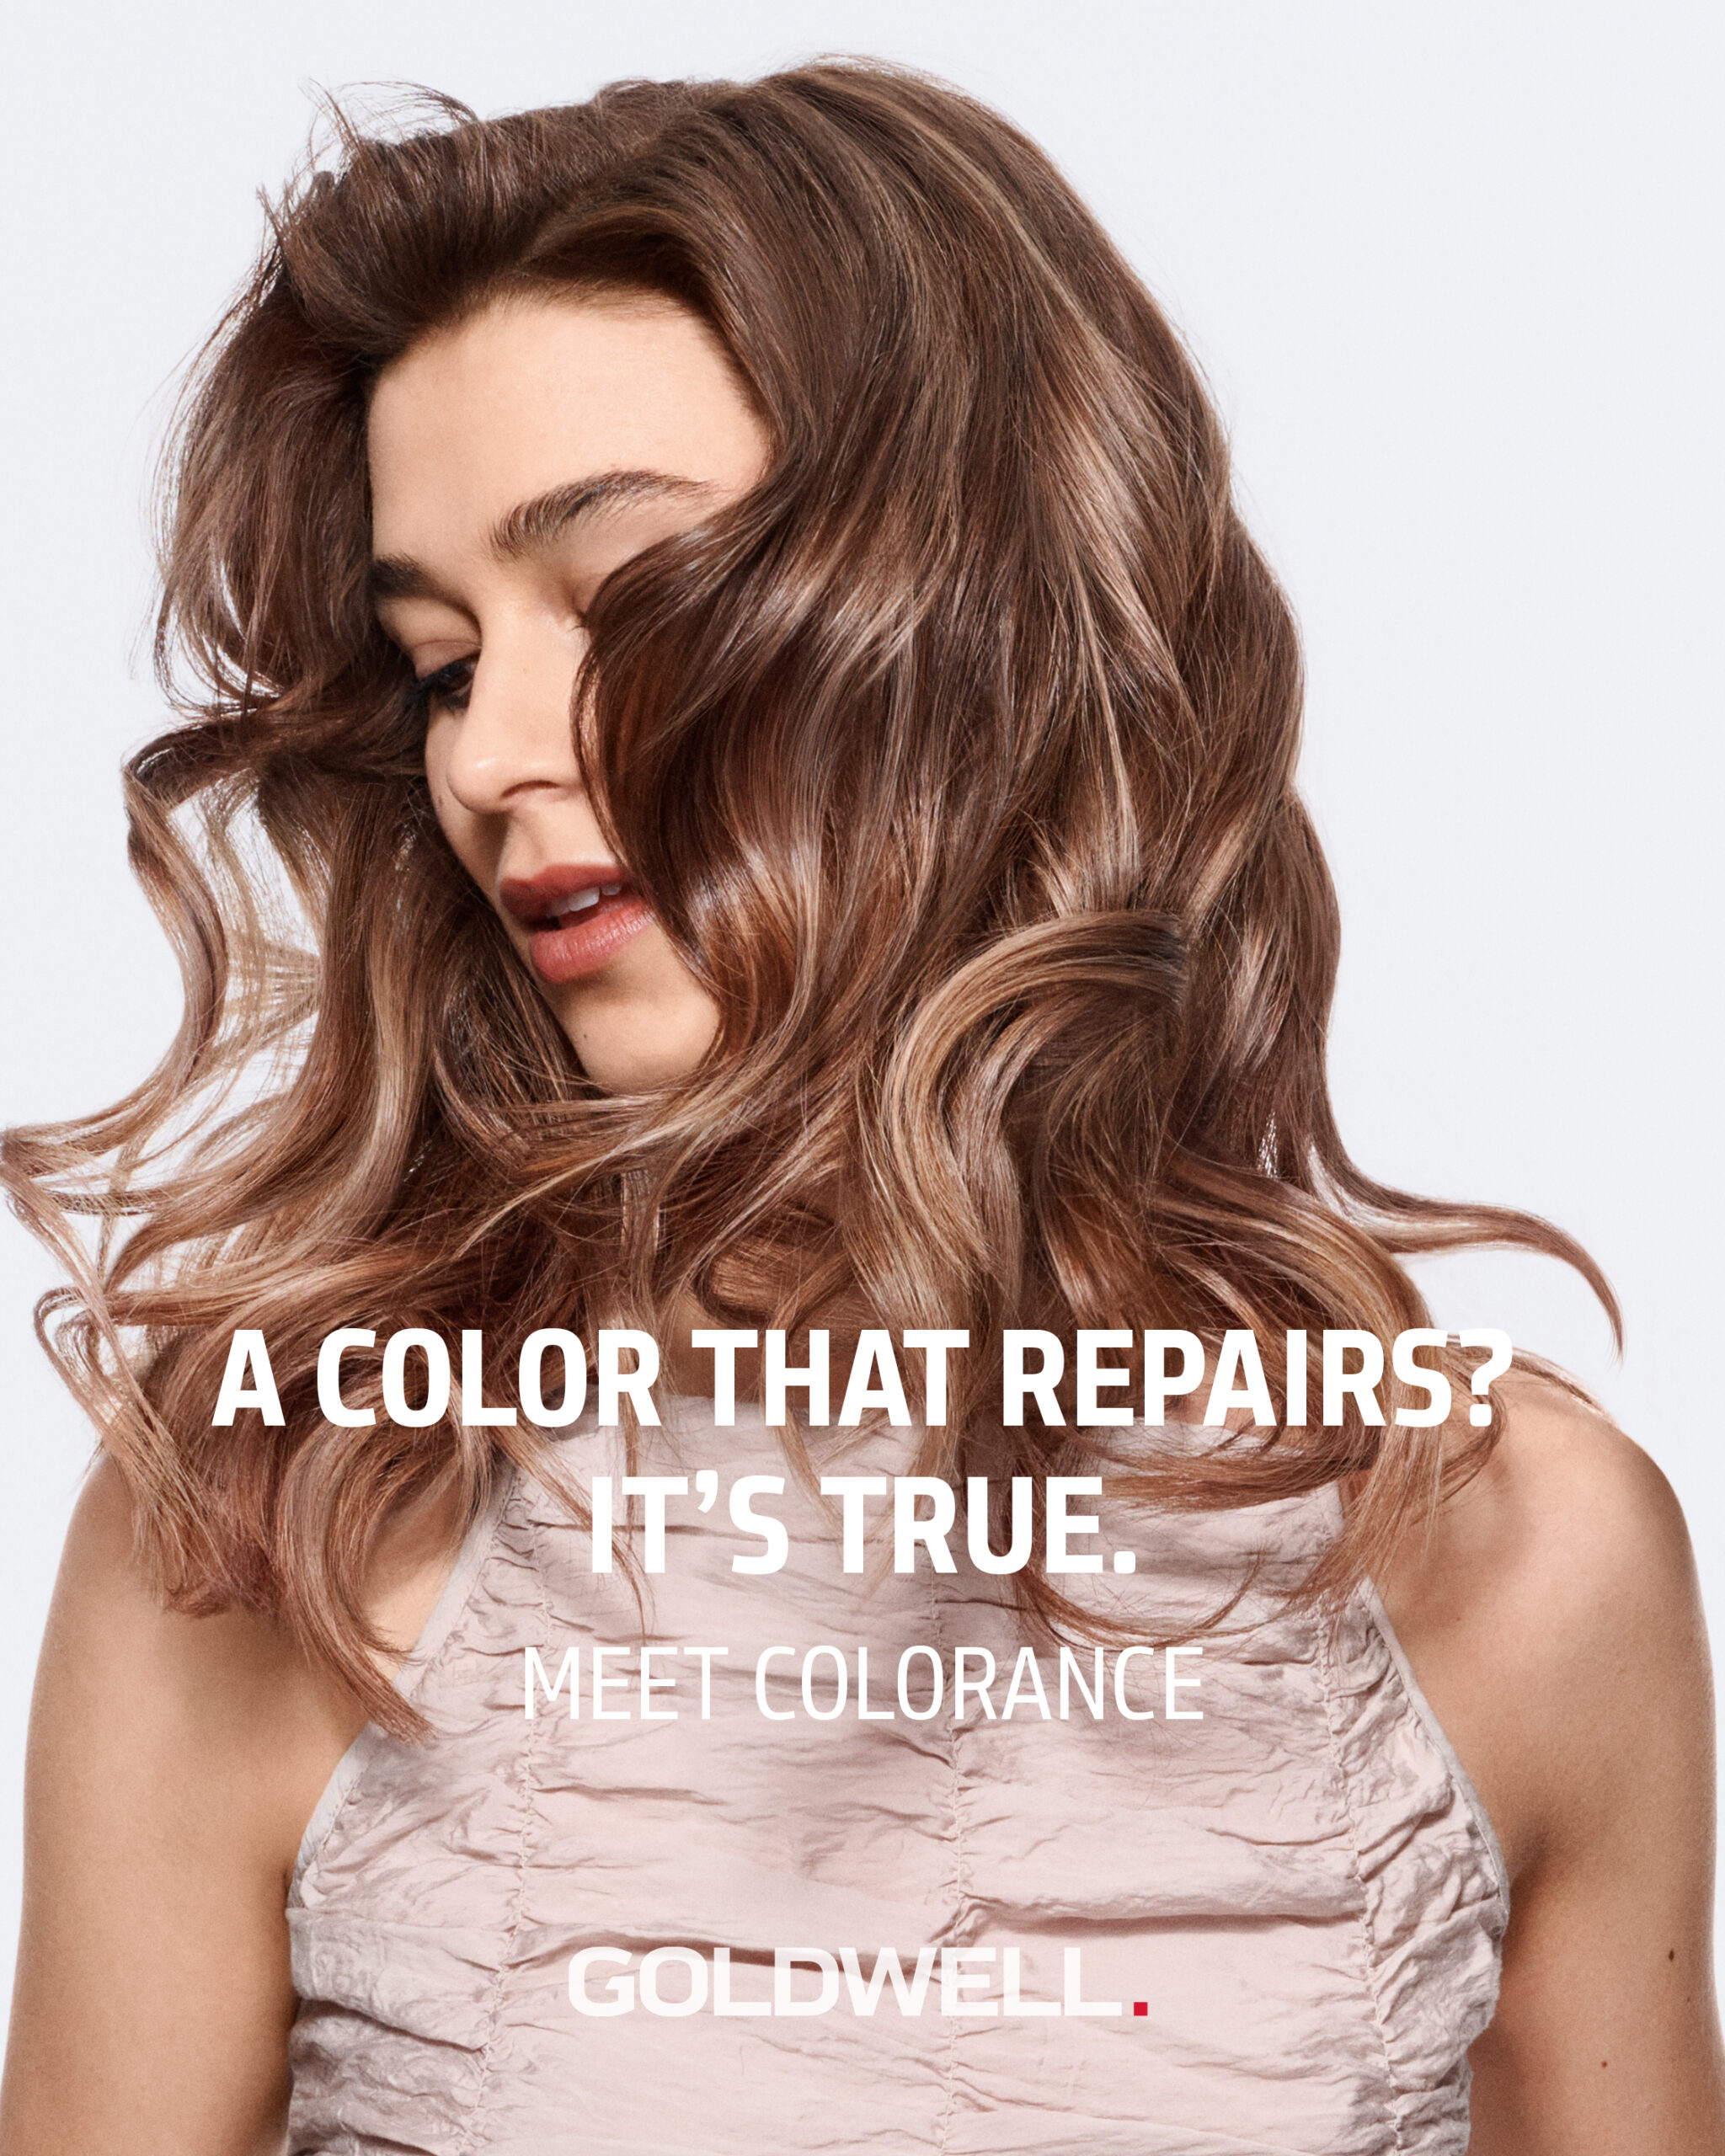 Goldwell Colourance Tones Lifestyle Imagery